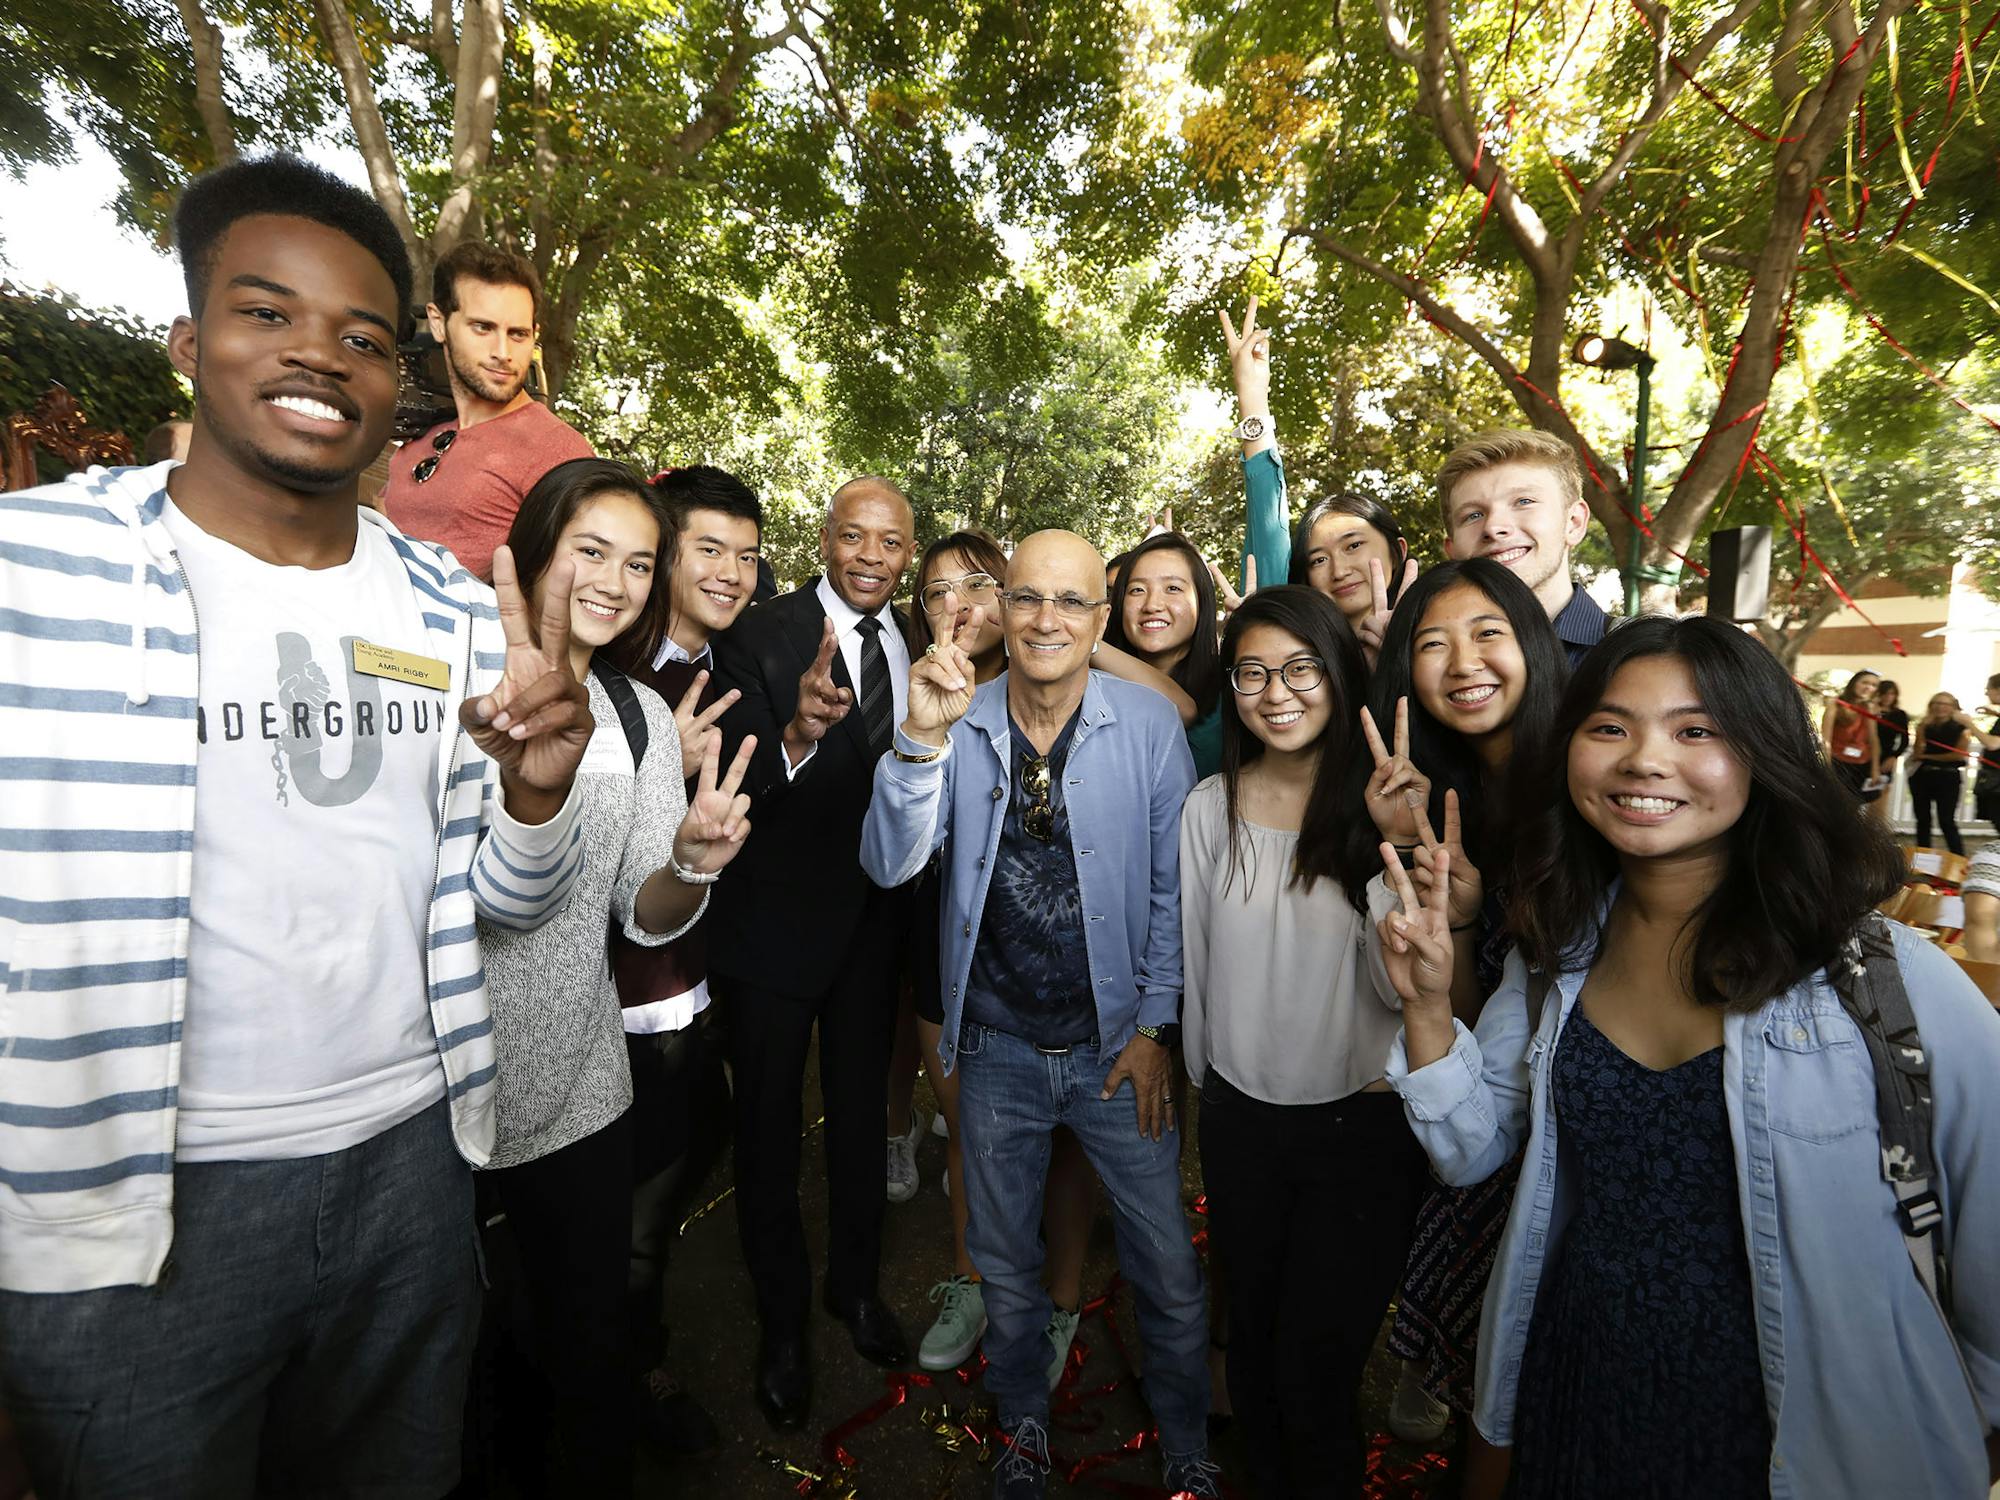 Group of students posing for photos with hand gesture for peace sign